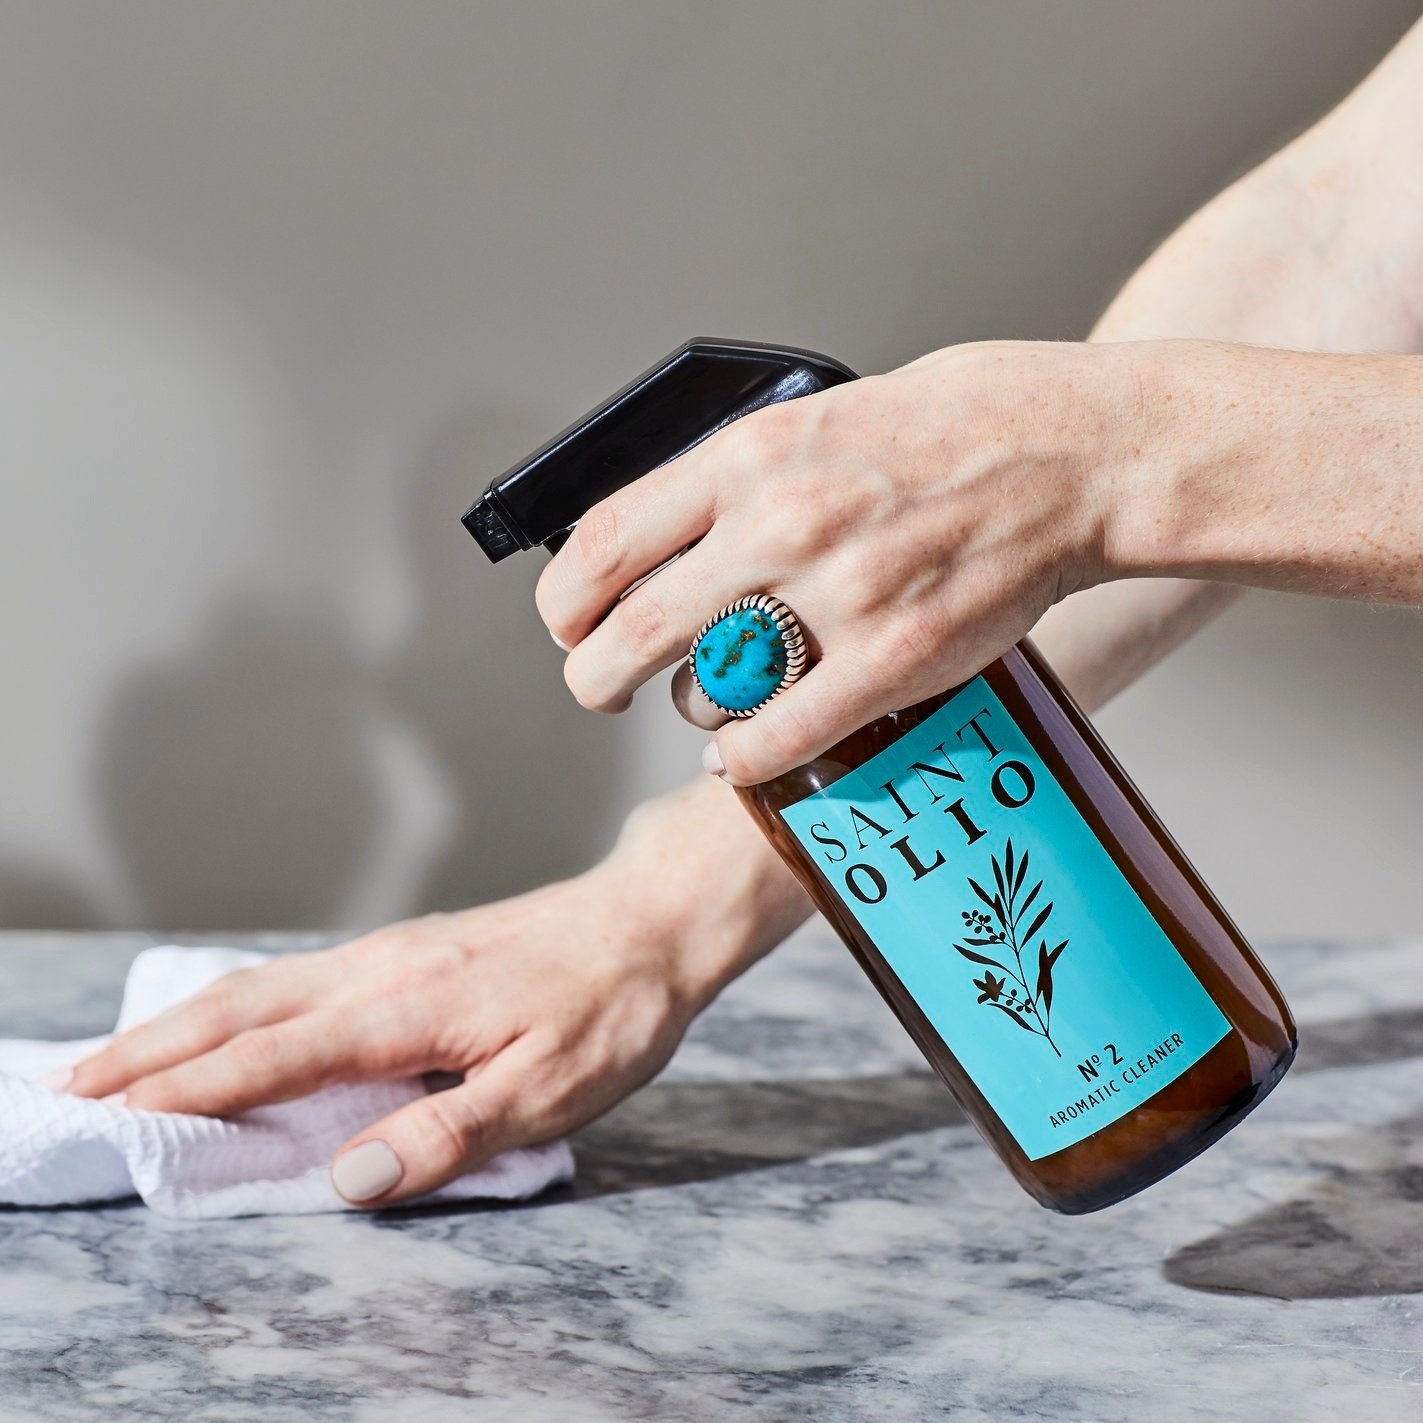 A person&#x27;s hand uses a bottle of the cleaner to clean a marble surface